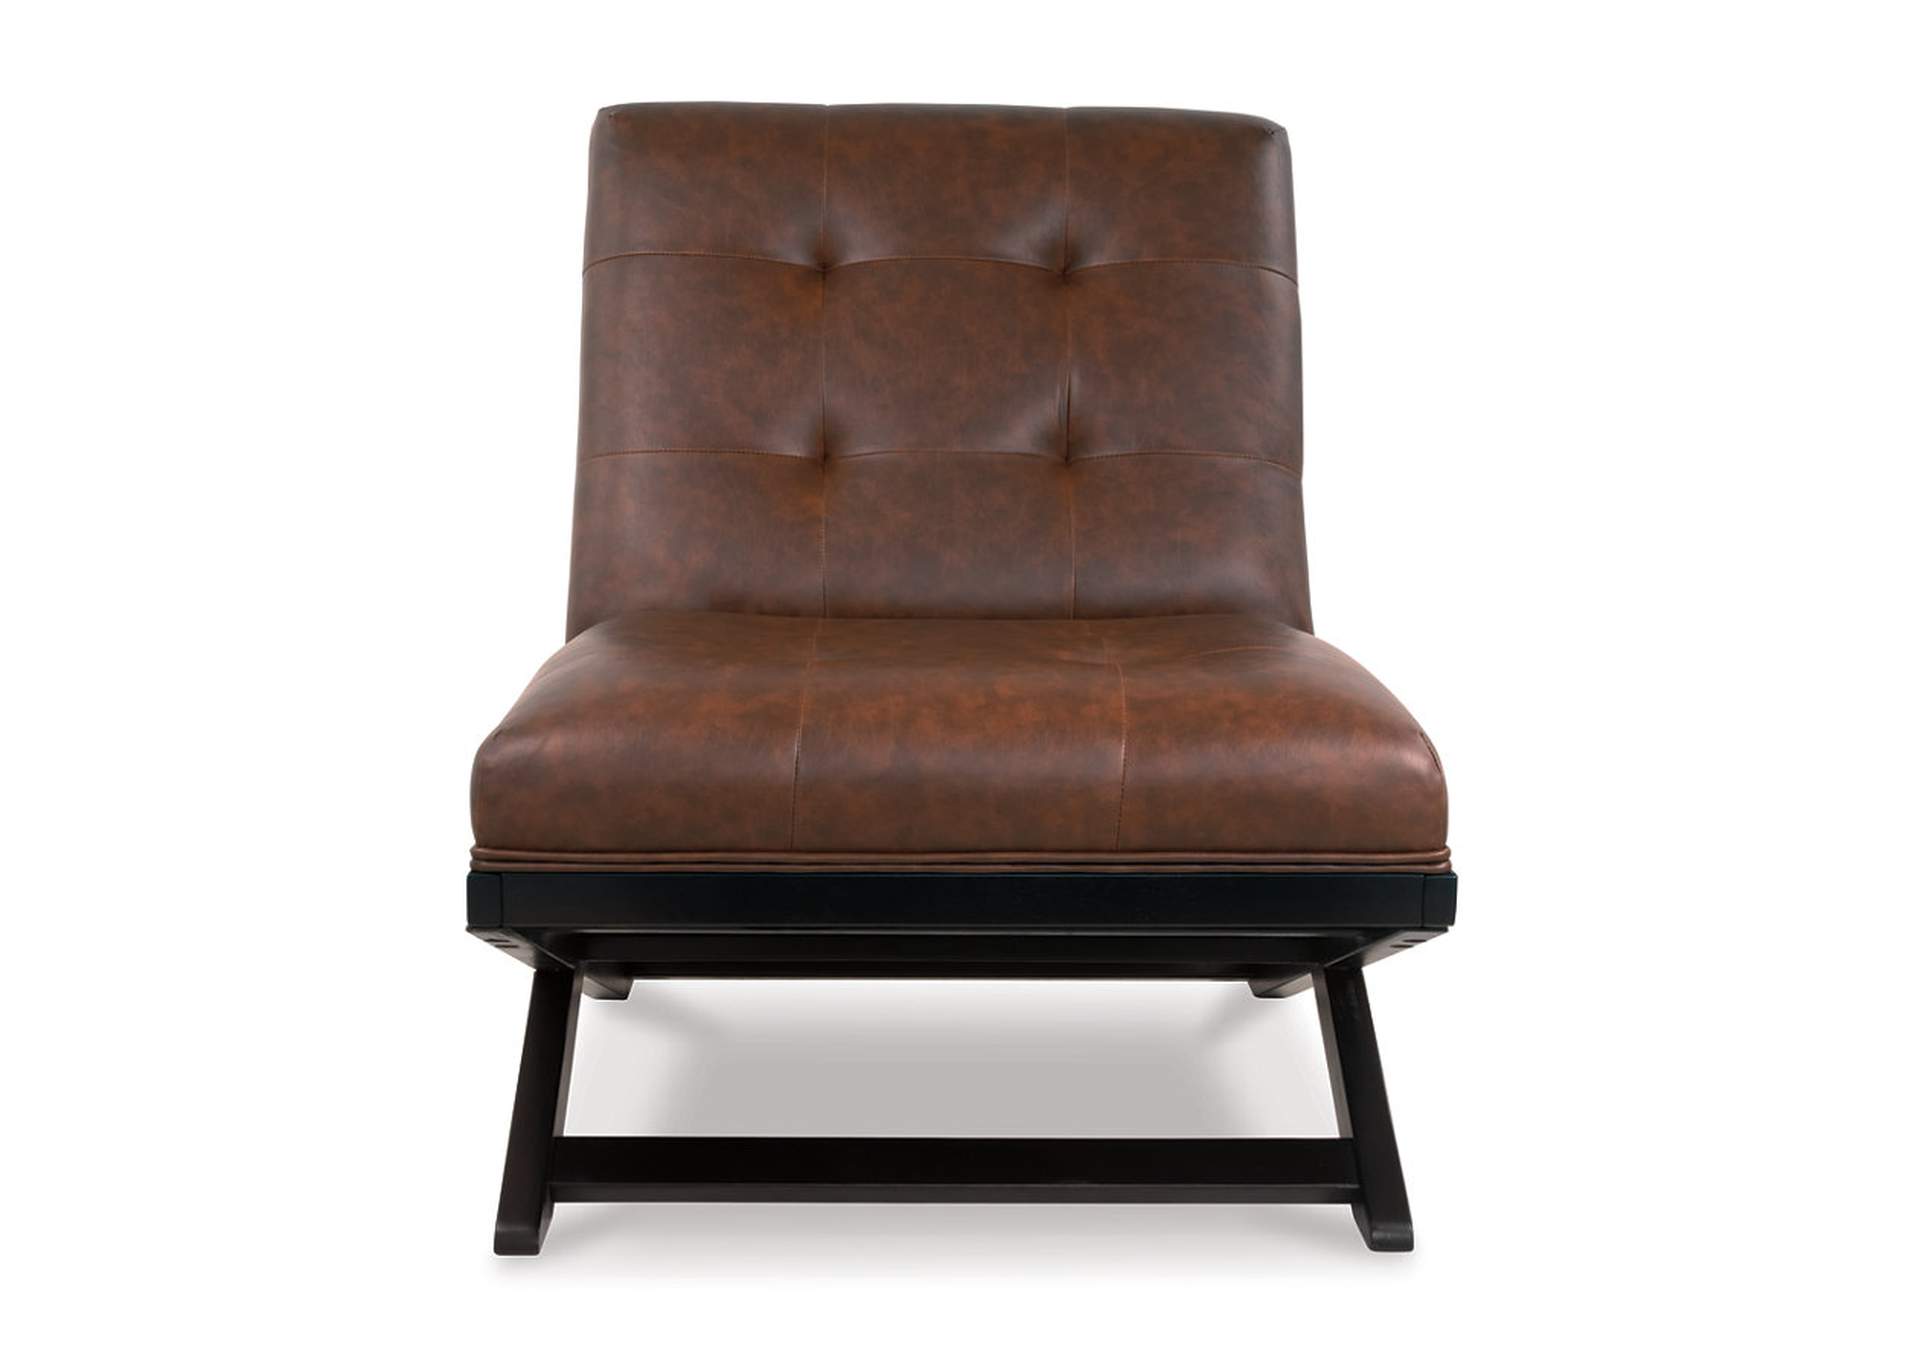 Sidewinder Accent Chair,Signature Design By Ashley